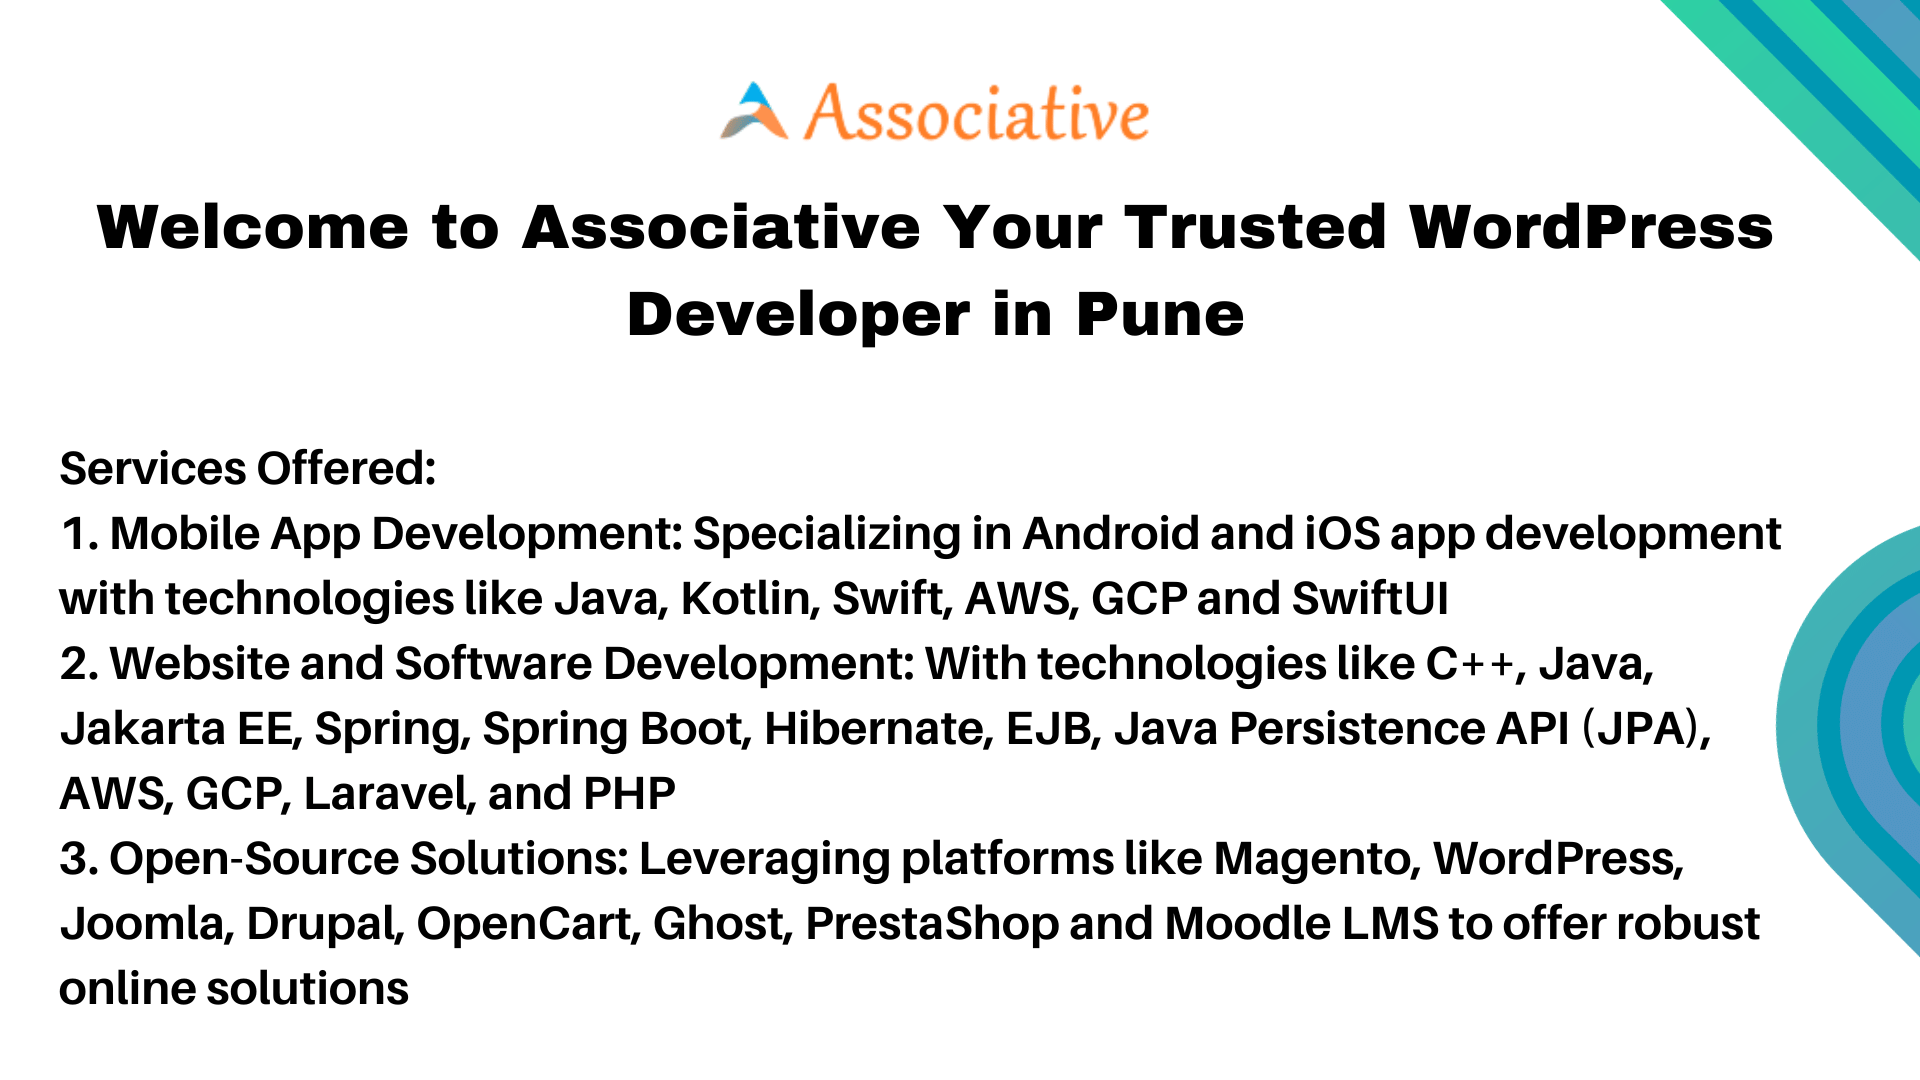 Welcome to Associative Your Trusted WordPress Developer in Pune